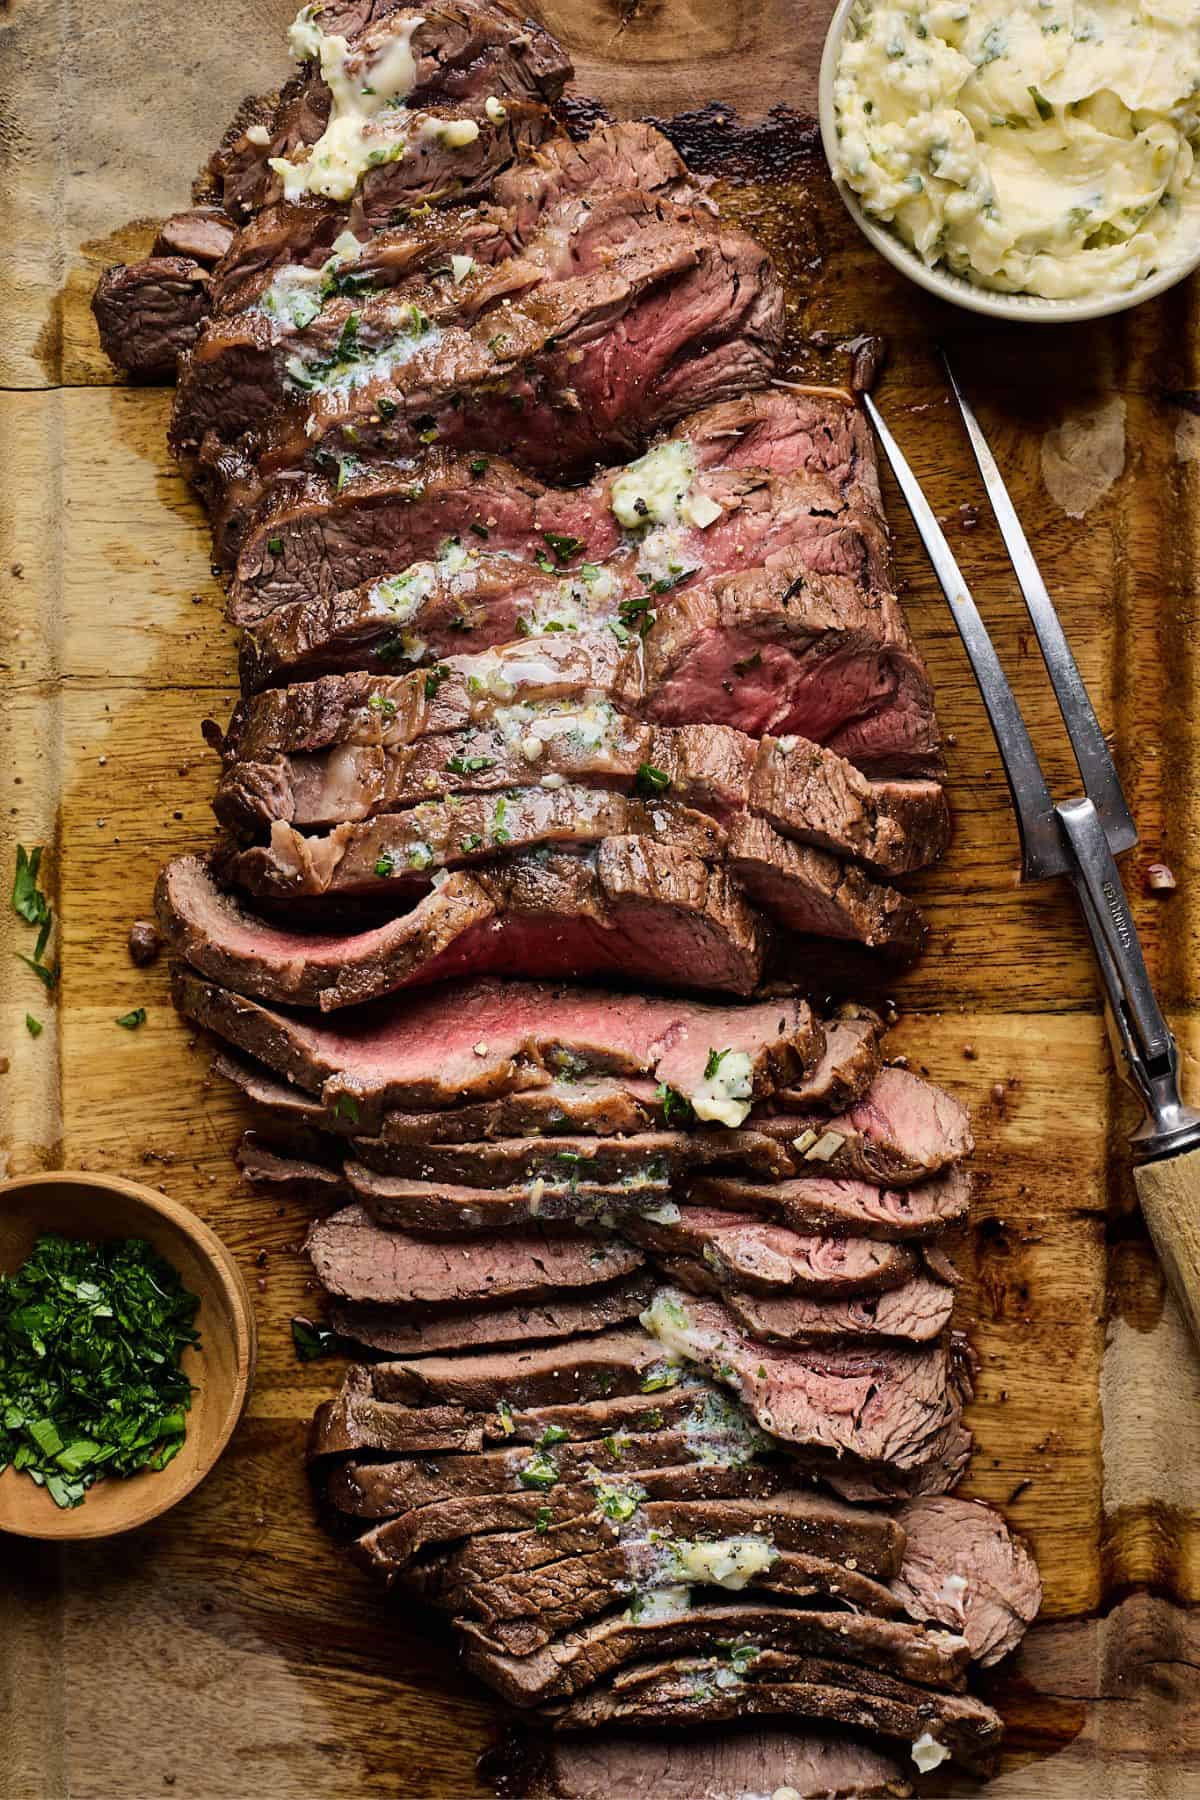 London broil smothered with herb butter on a wooden cutting board butter after slicing